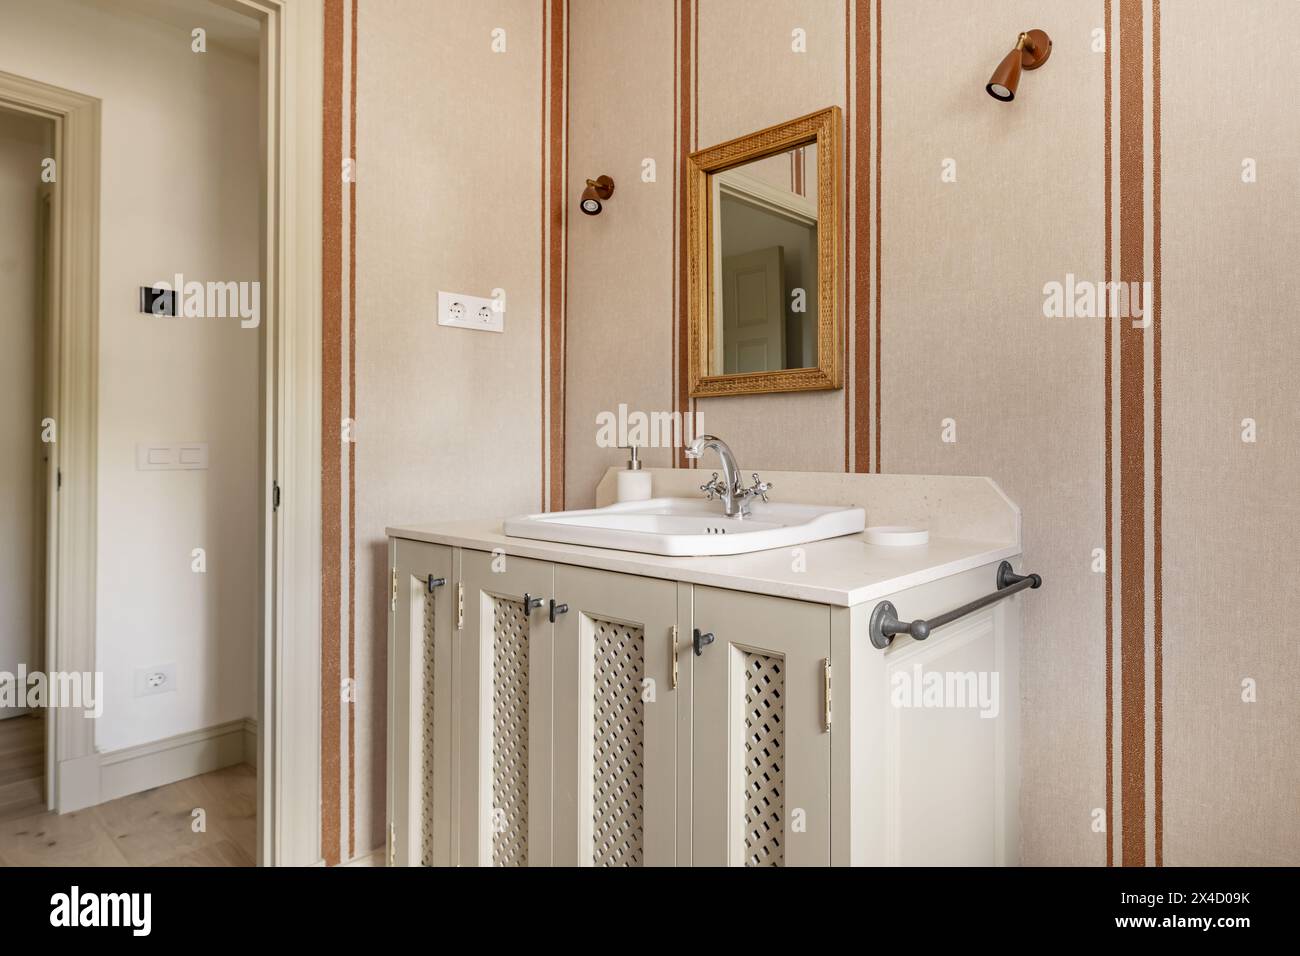 Modern design bathroom with cream marble sink, rectangular mirror with golden wooden frame, and matching walls with decorative wallpaper Stock Photo